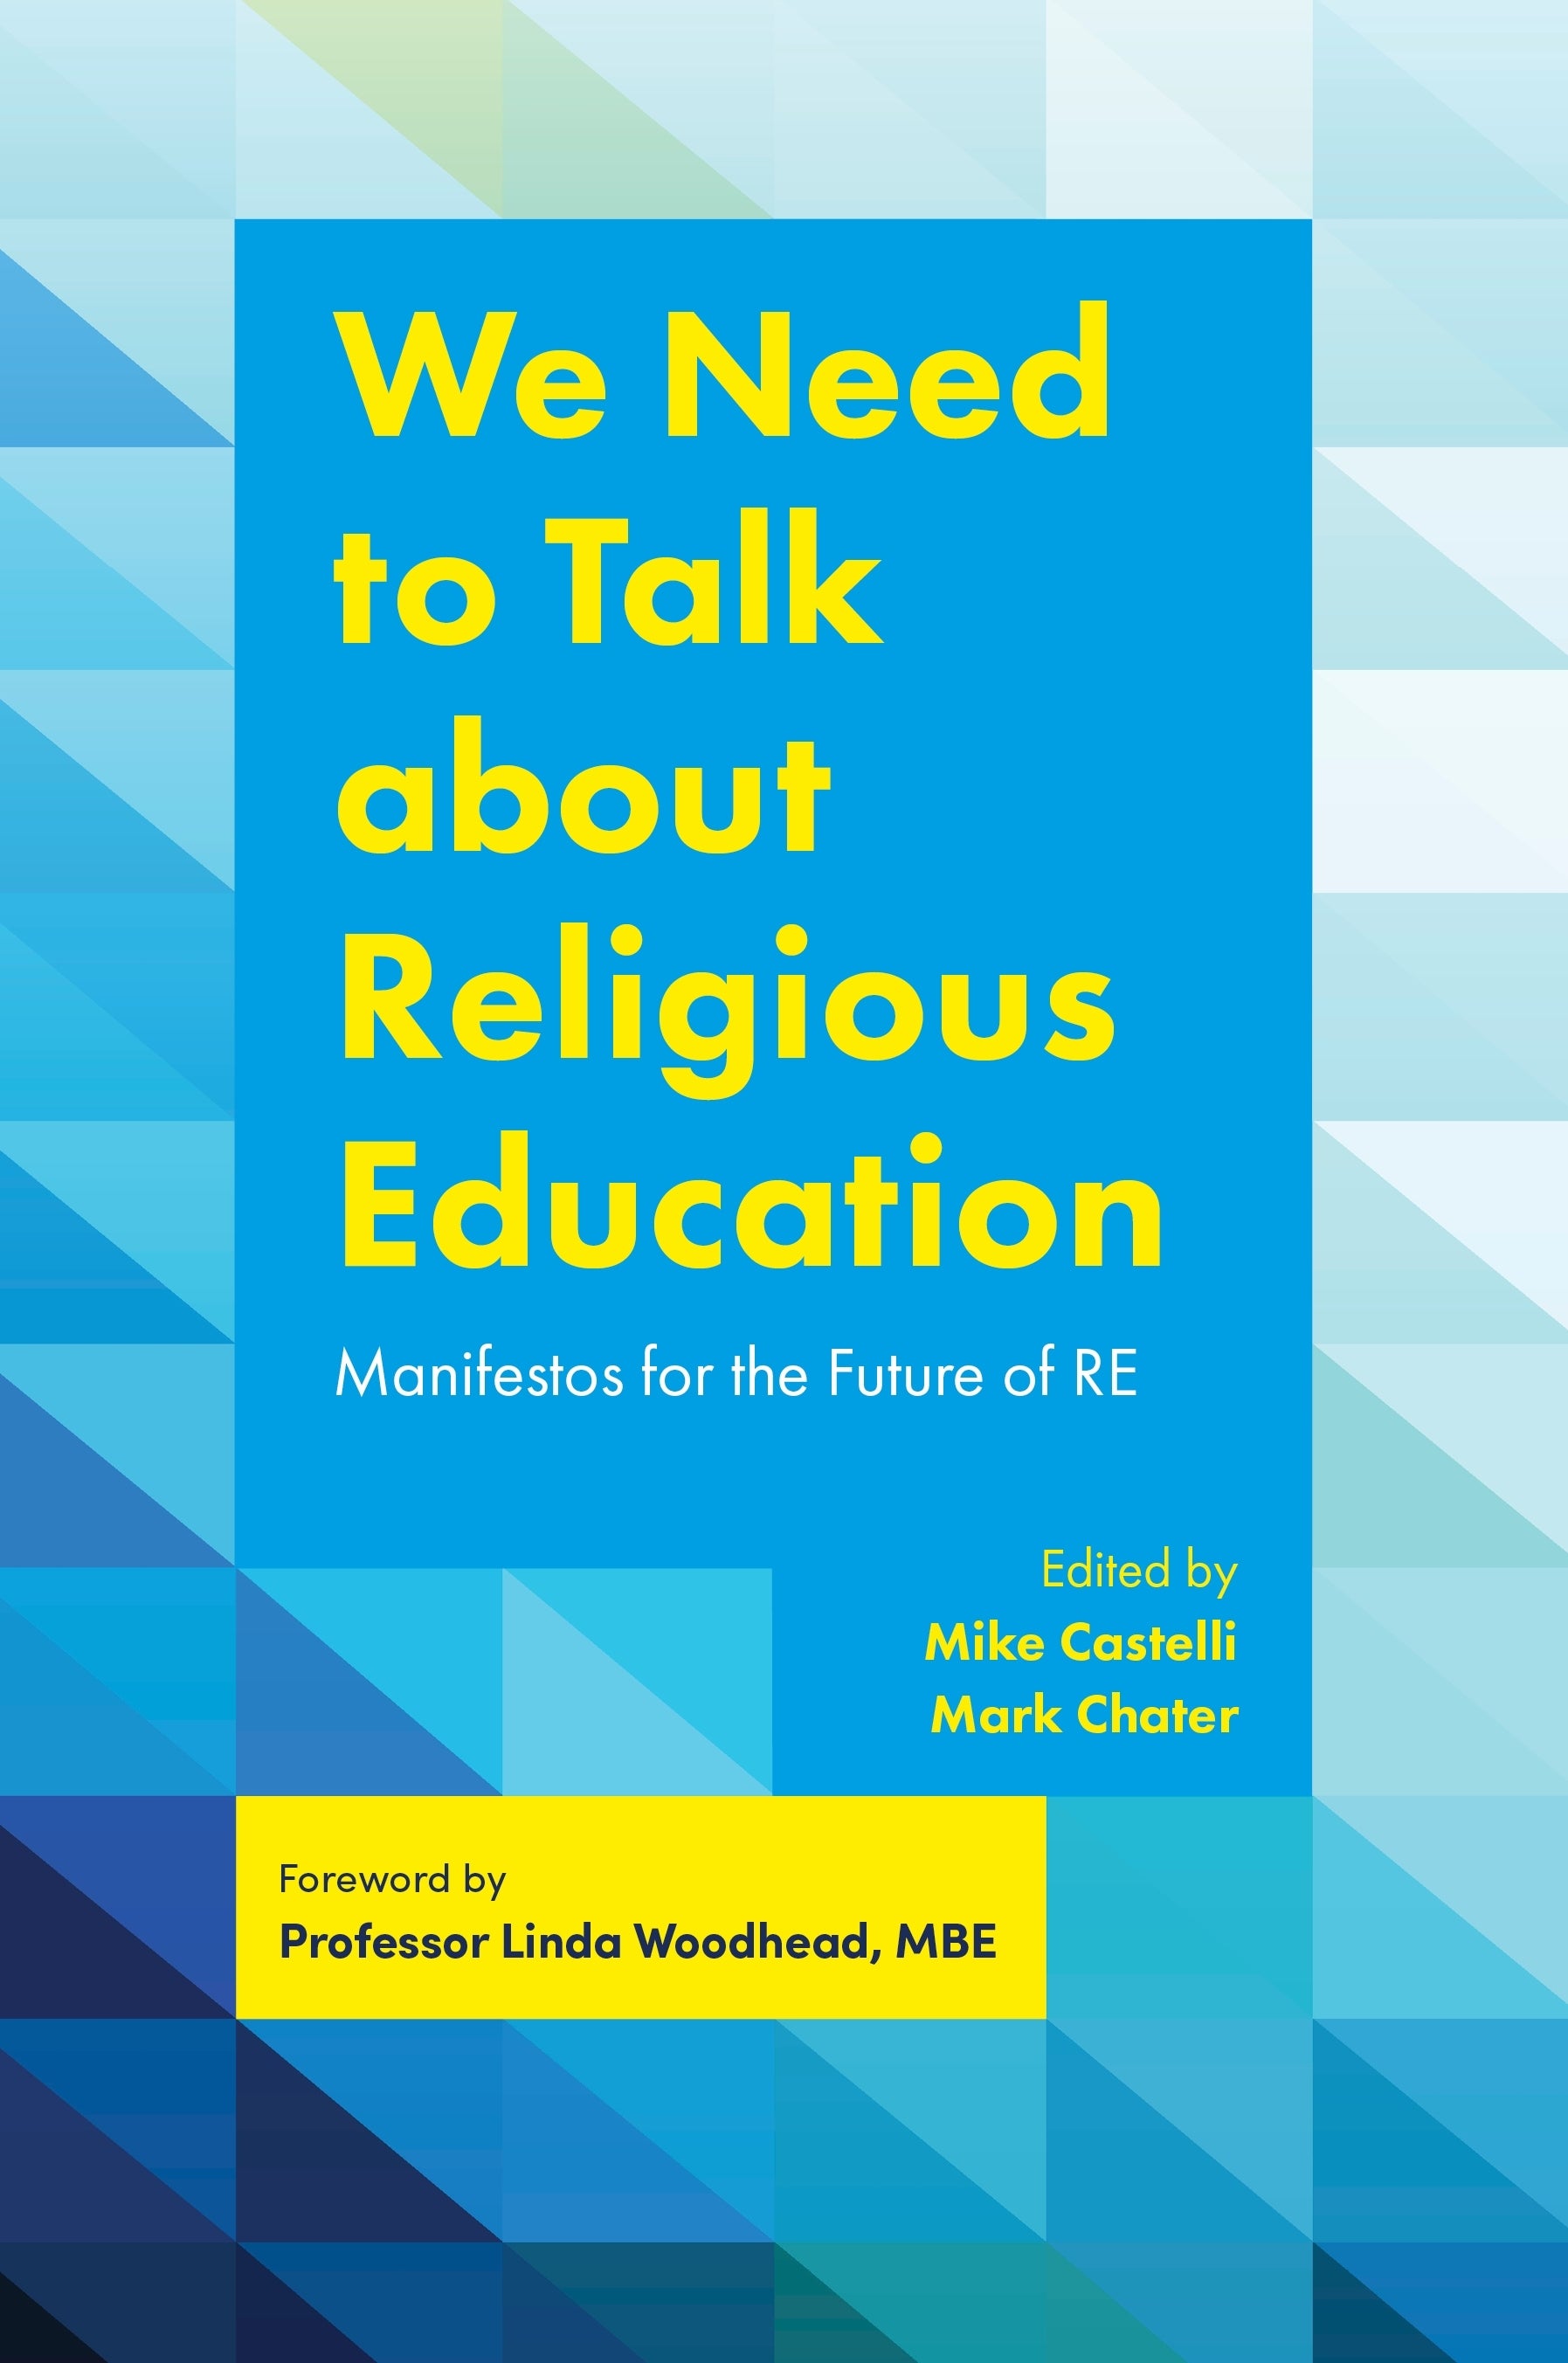 We Need to Talk about Religious Education by No Author Listed, Mark Chater, Mike Castelli, Zameer Hussain, Linda Woodhead